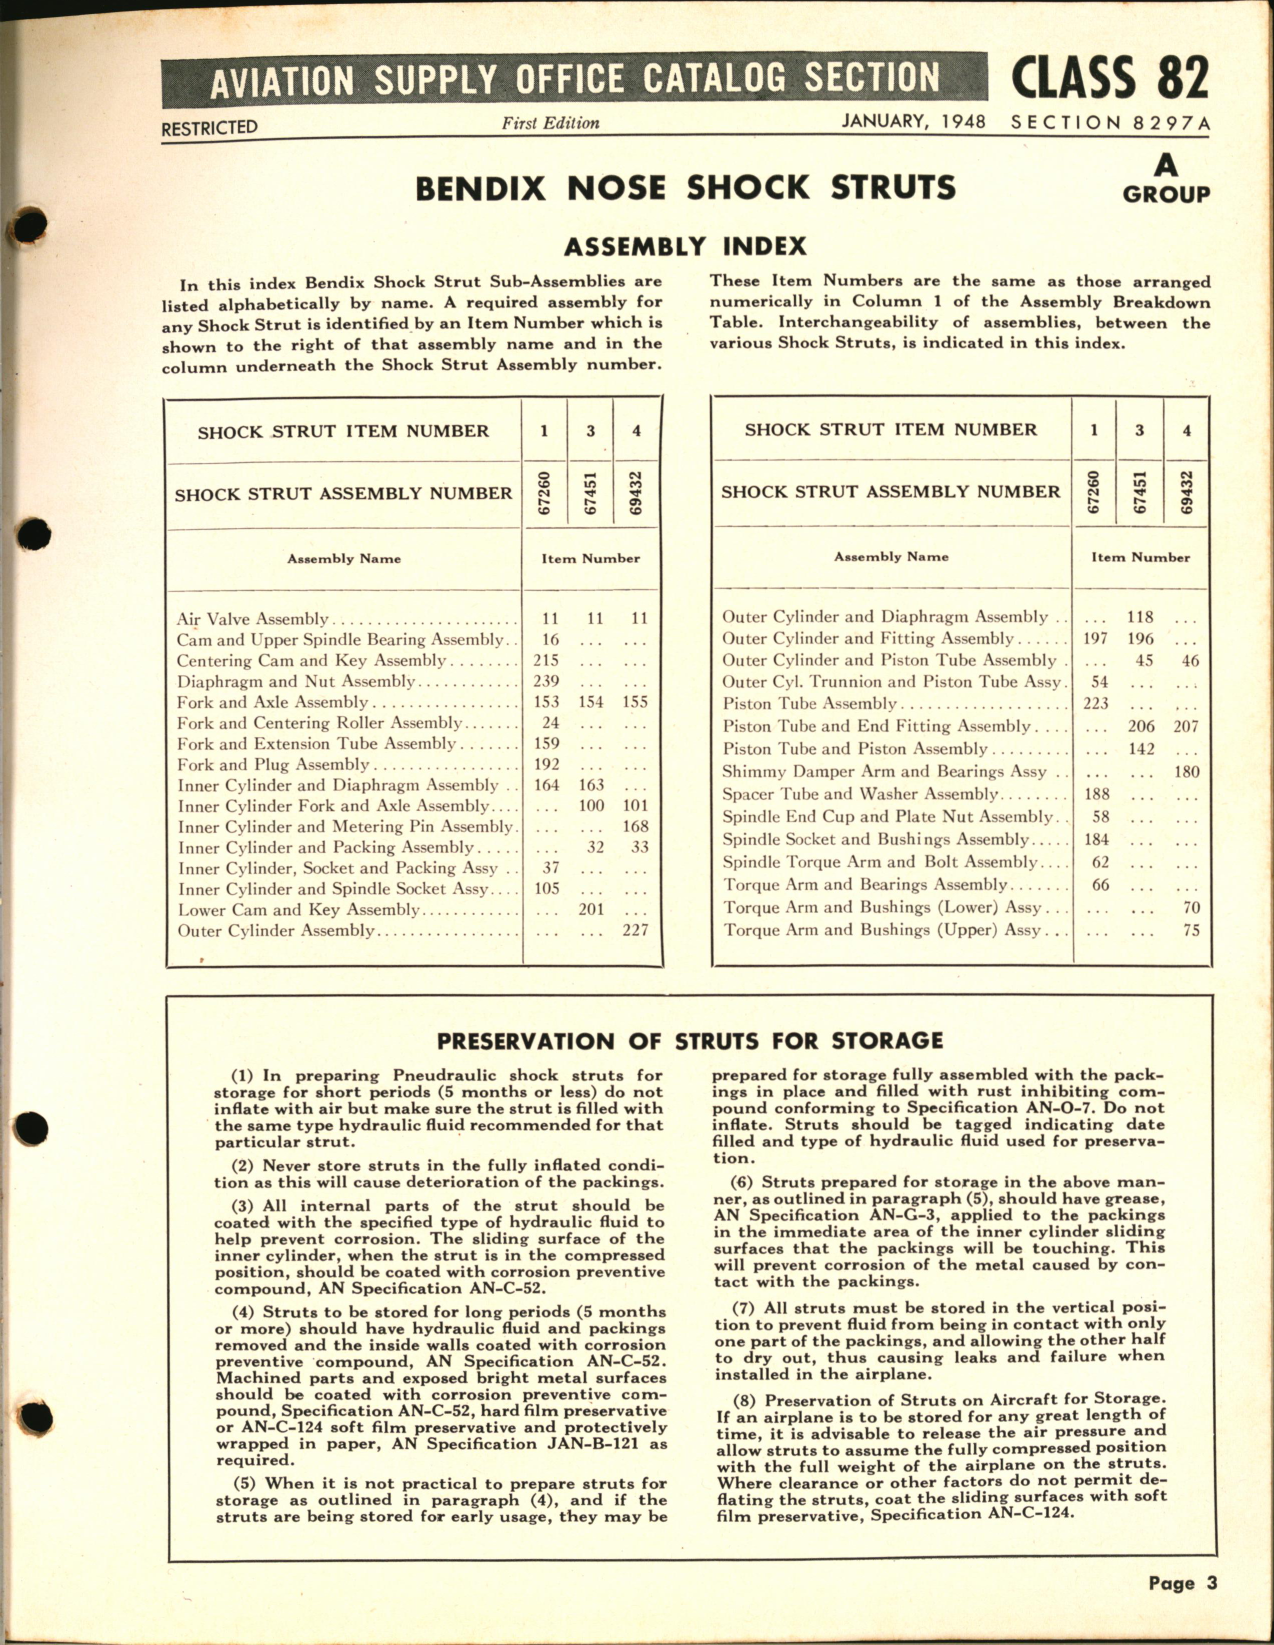 Sample page 3 from AirCorps Library document: Bendix Shock Struts for Nose, Tail, Main